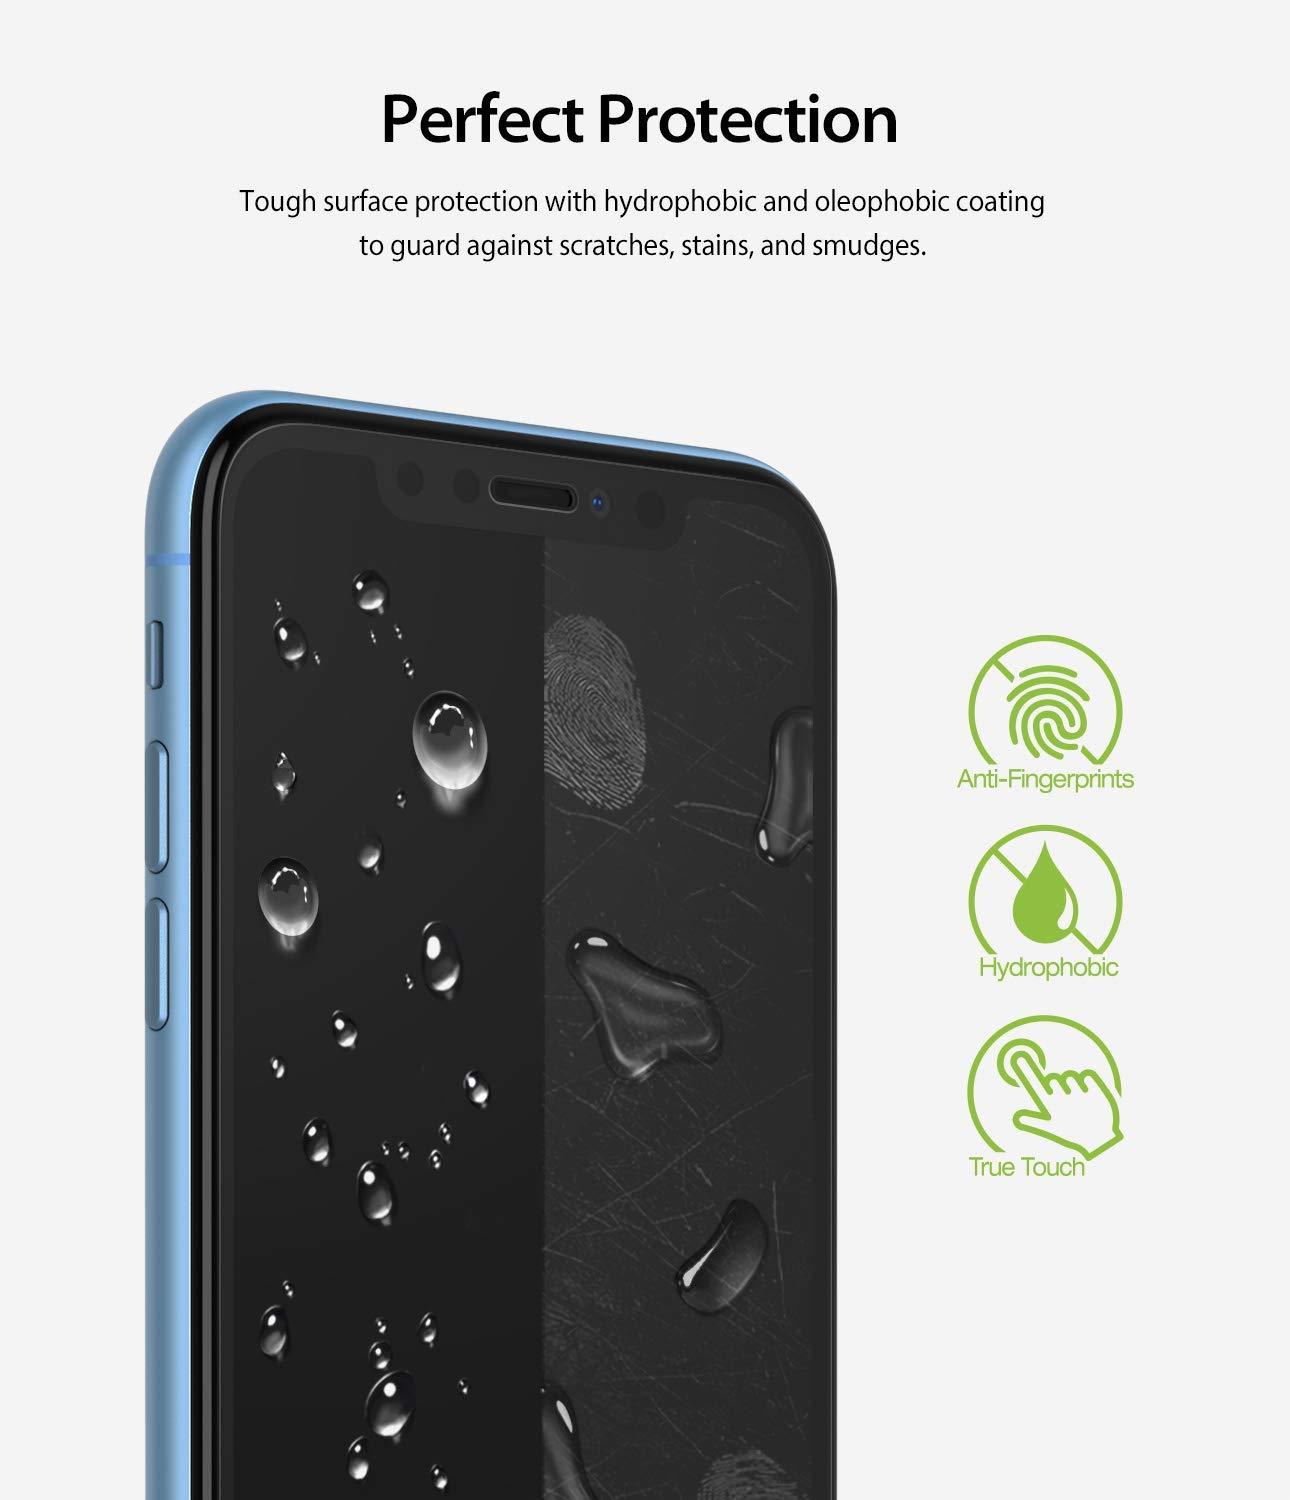 ringke dual easy film for iphone xr screen protector perfect protection